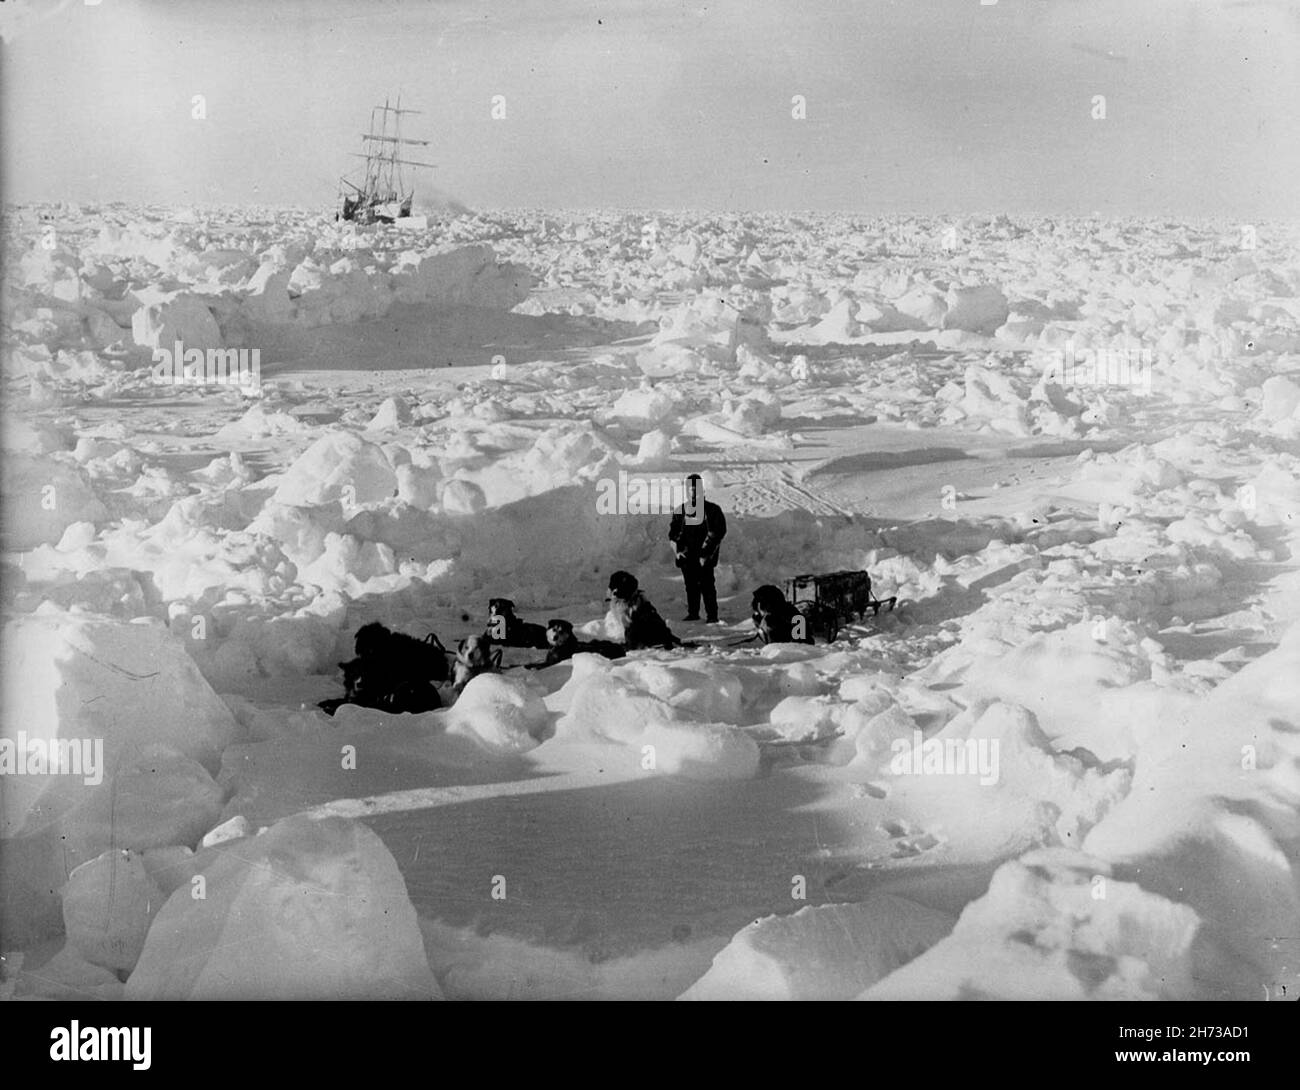 Ernest Shackleton's ship Endurance stuck in the Antarctic pack ice in the Weddell Sea during his epic expedition in 1912 Stock Photo